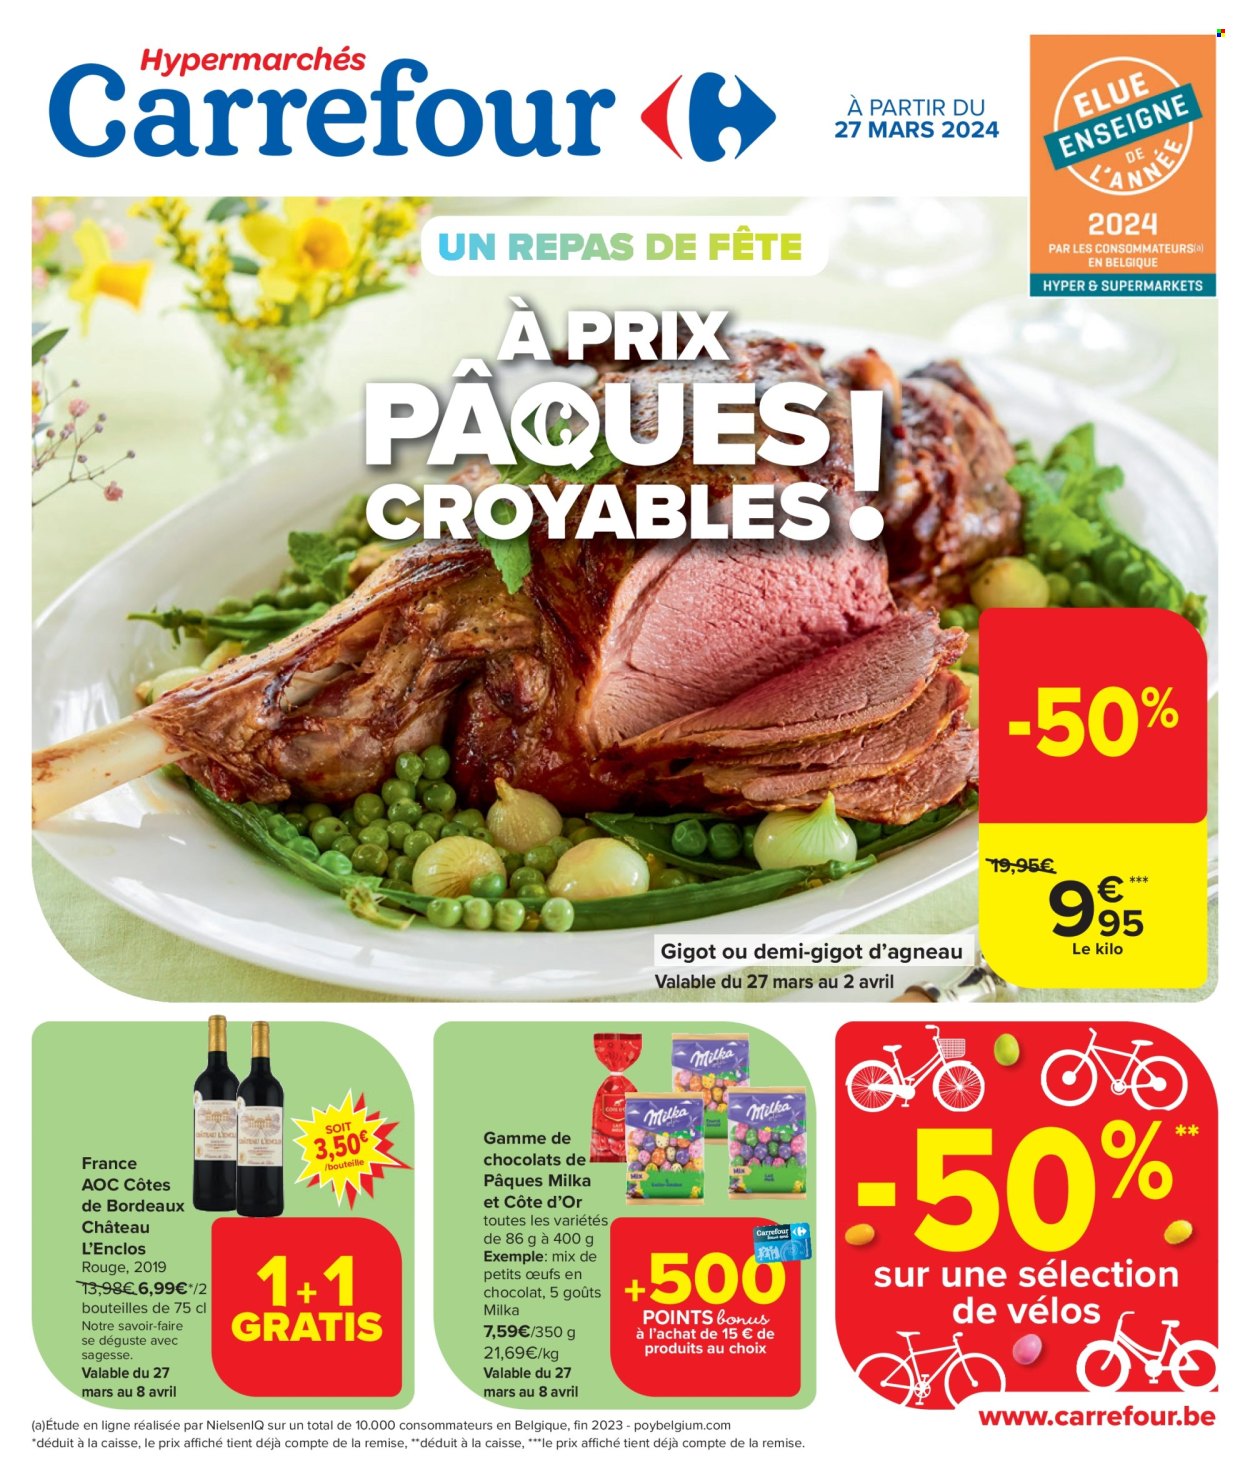 Catalogue Carrefour hypermarkt - 27.3.2024 - 8.4.2024. Page 1.